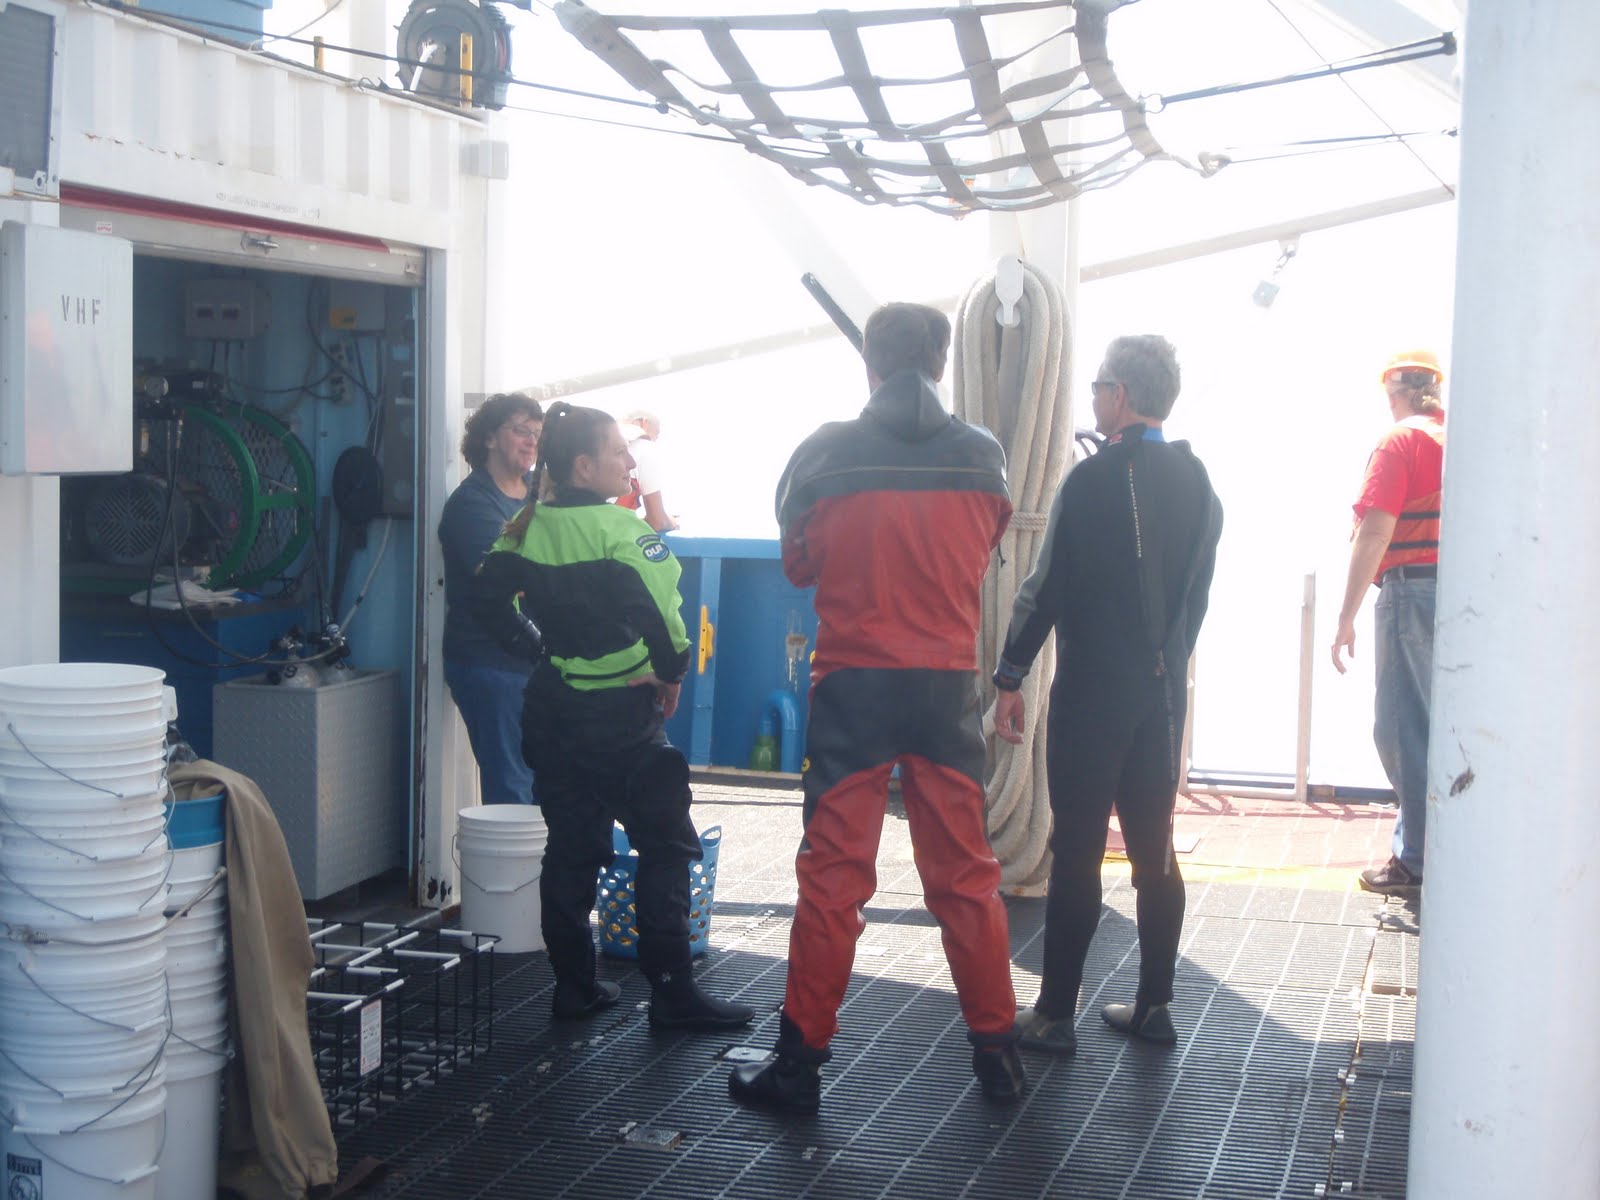 divers and some crew conversing on deck